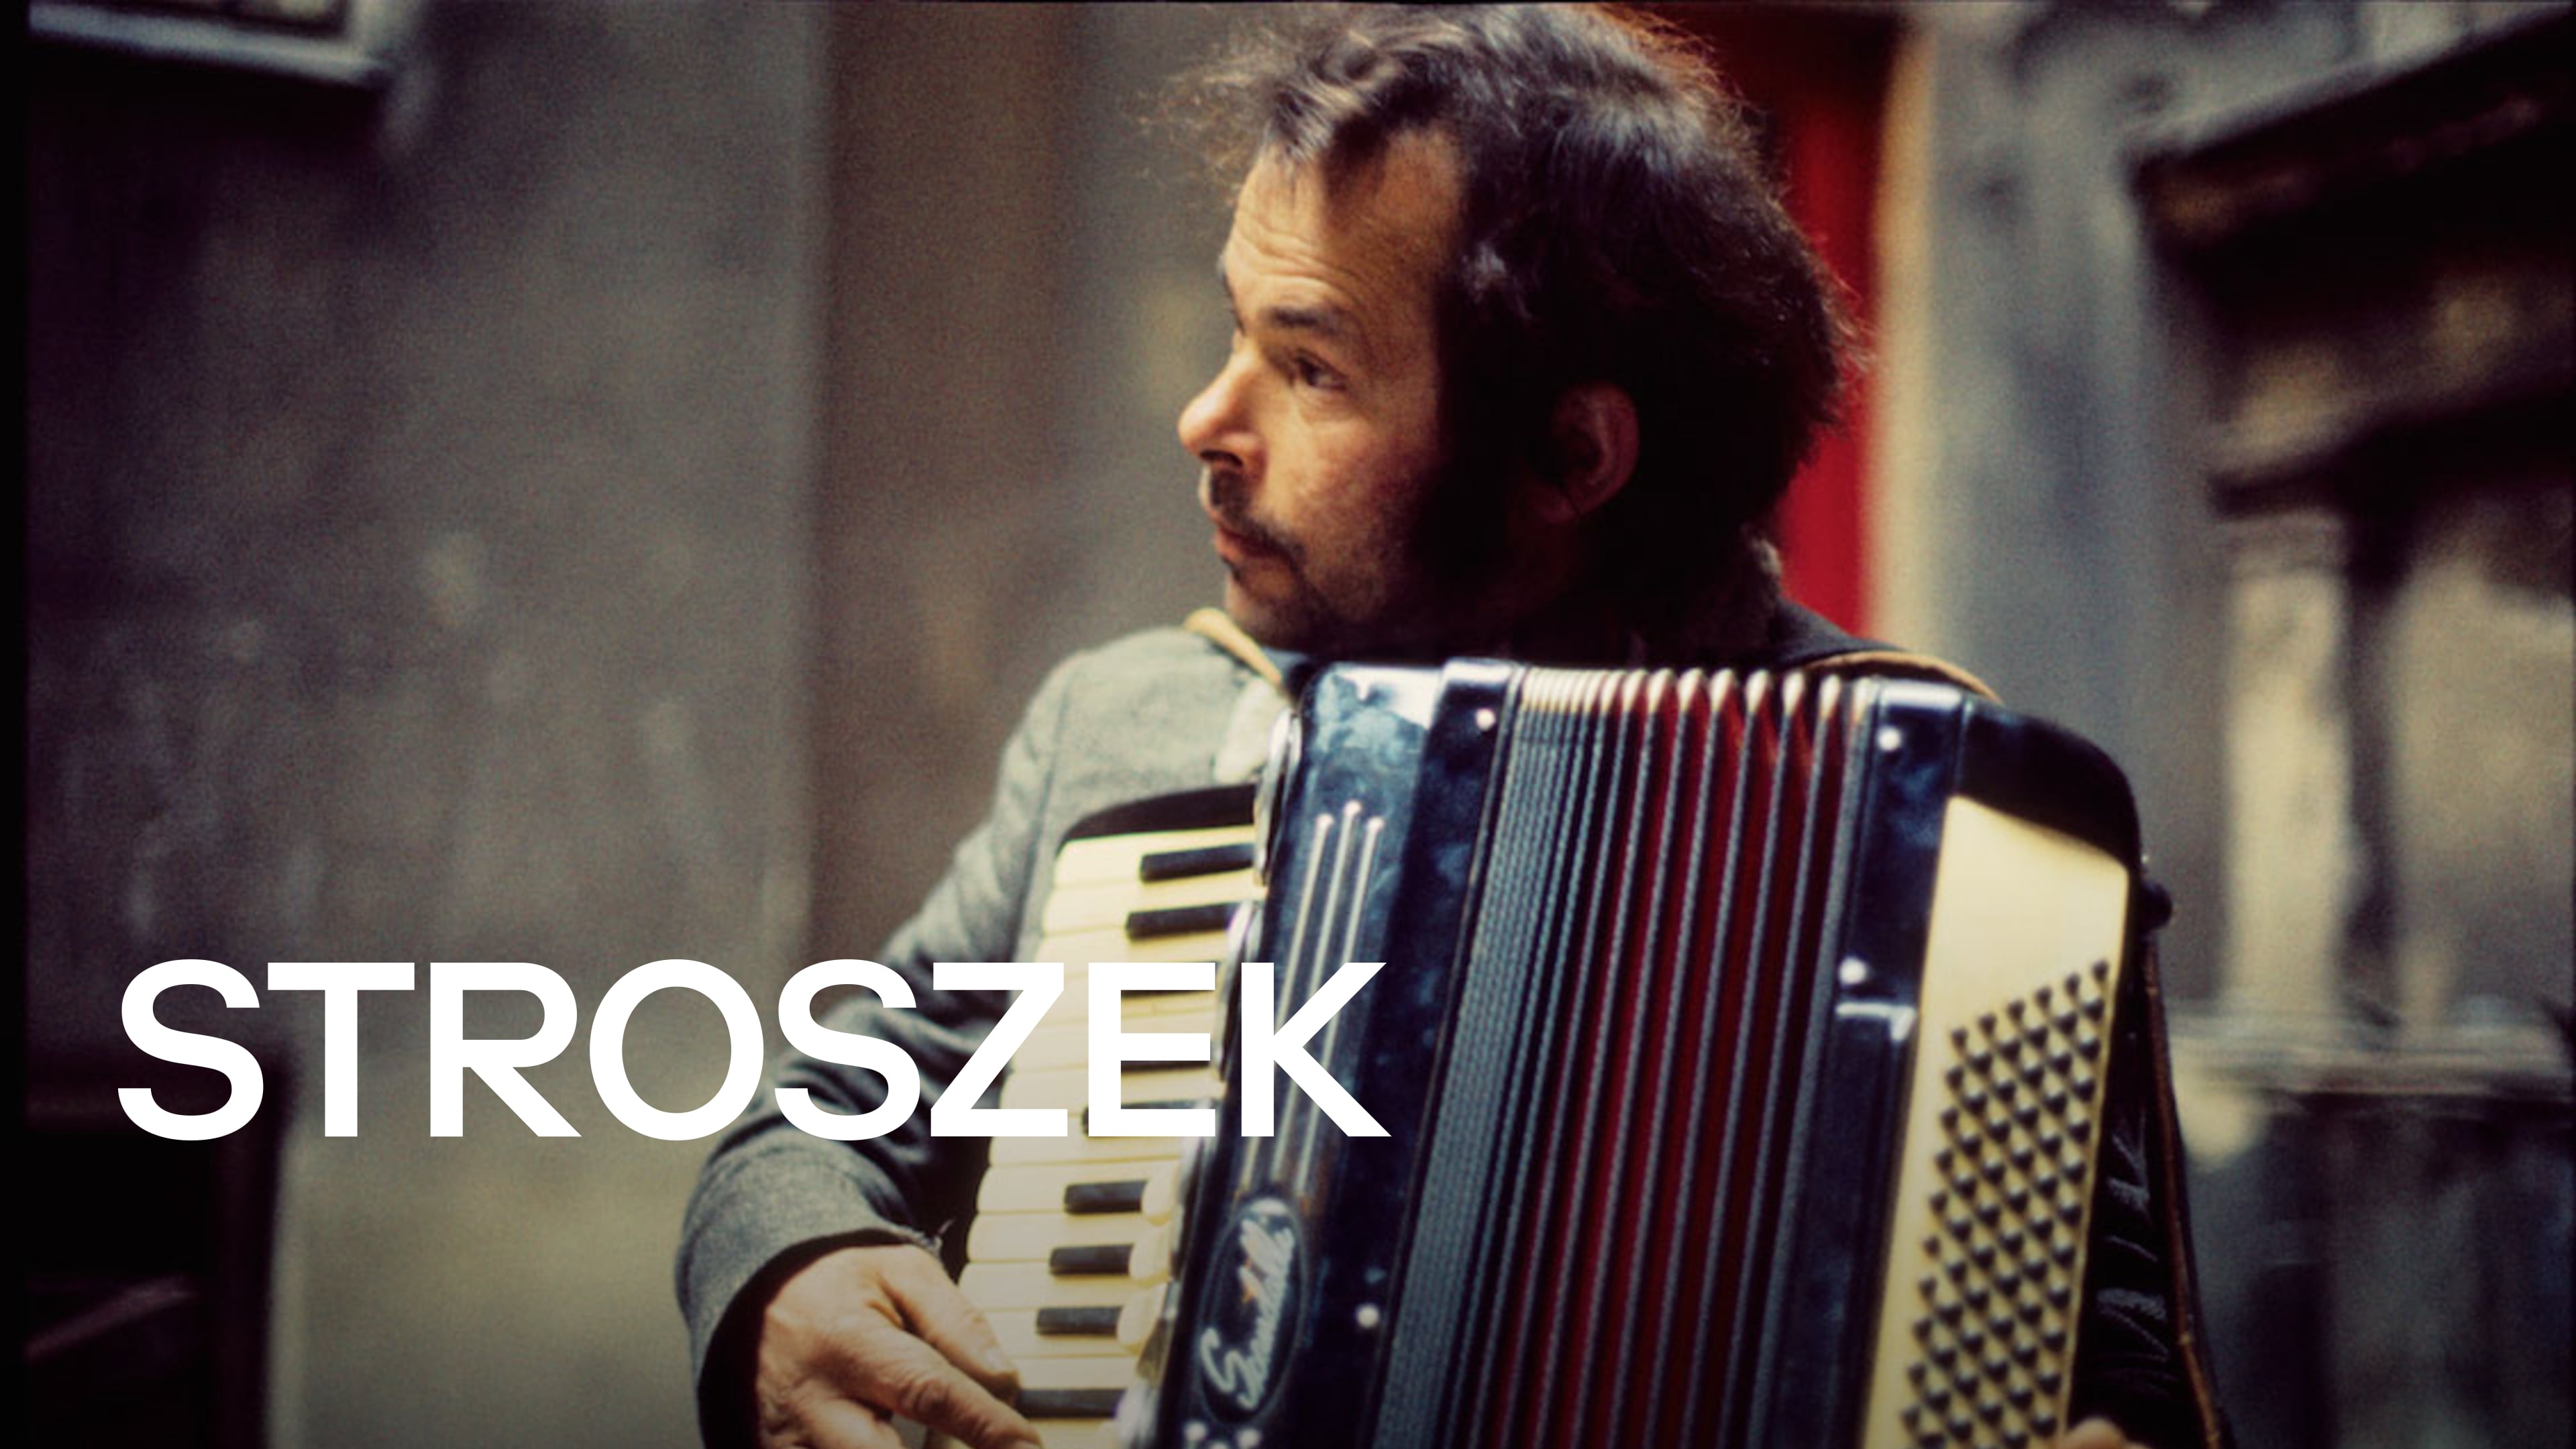 37-facts-about-the-movie-stroszek